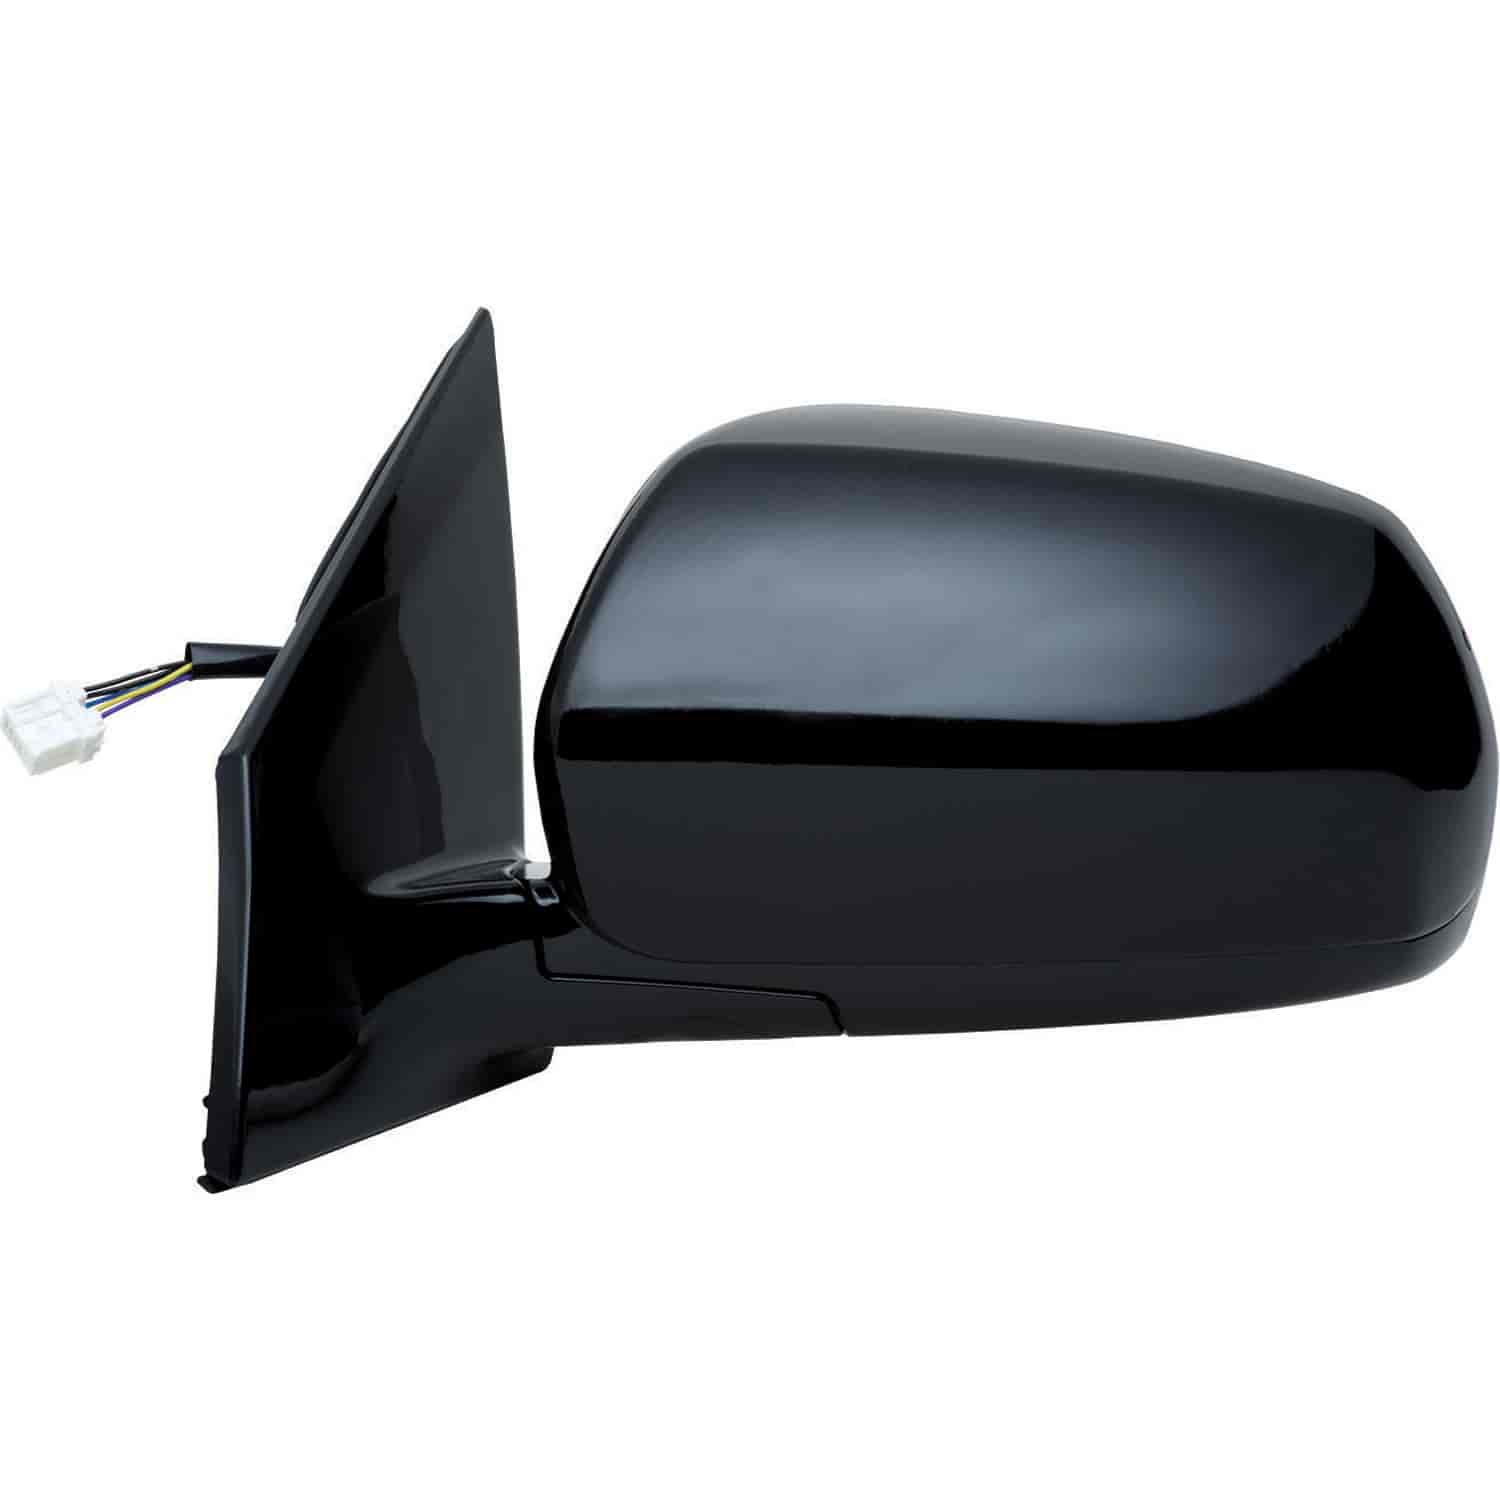 OEM Style Replacement mirror for 05-07 Nissan Murano w/memory driver side mirror tested to fit and f